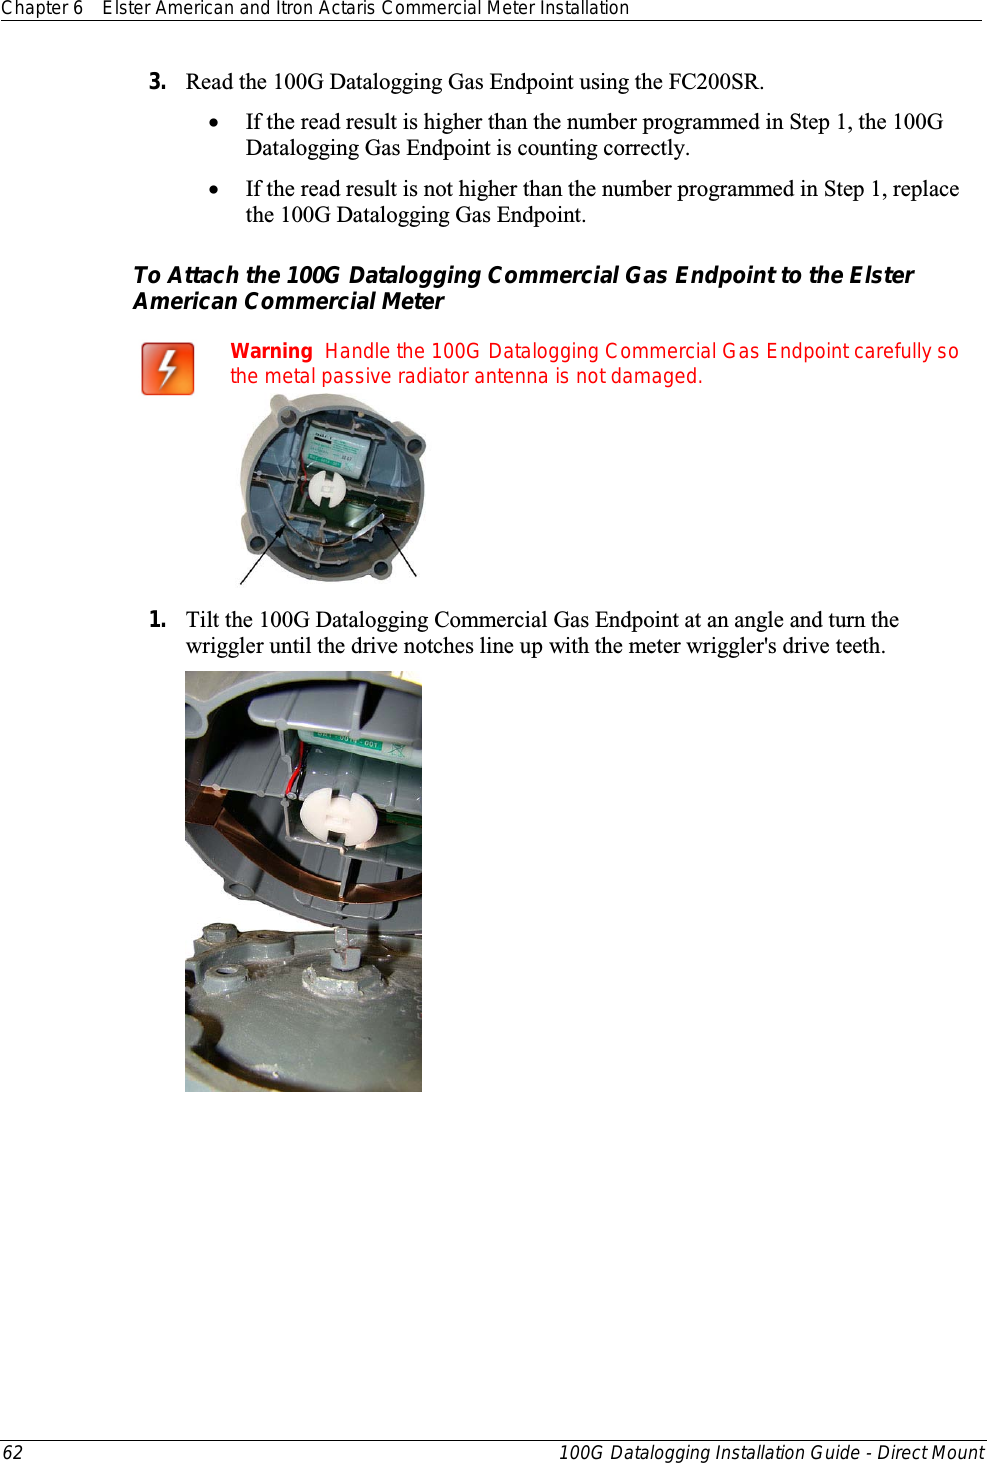 Chapter 6 Elster American and Itron Actaris Commercial Meter Installation  62 100G Datalogging Installation Guide - Direct Mount  3. Read the 100G Datalogging Gas Endpoint using the FC200SR.  • If the read result is higher than the number programmed in Step 1, the 100G Datalogging Gas Endpoint is counting correctly.  • If the read result is not higher than the number programmed in Step 1, replace the 100G Datalogging Gas Endpoint.  To Attach the 100G Datalogging Commercial Gas Endpoint to the Elster American Commercial Meter                 Warning  Handle the 100G Datalogging Commercial Gas Endpoint carefully so the metal passive radiator antenna is not damaged.  1. Tilt the 100G Datalogging Commercial Gas Endpoint at an angle and turn the wriggler until the drive notches line up with the meter wriggler&apos;s drive teeth.        